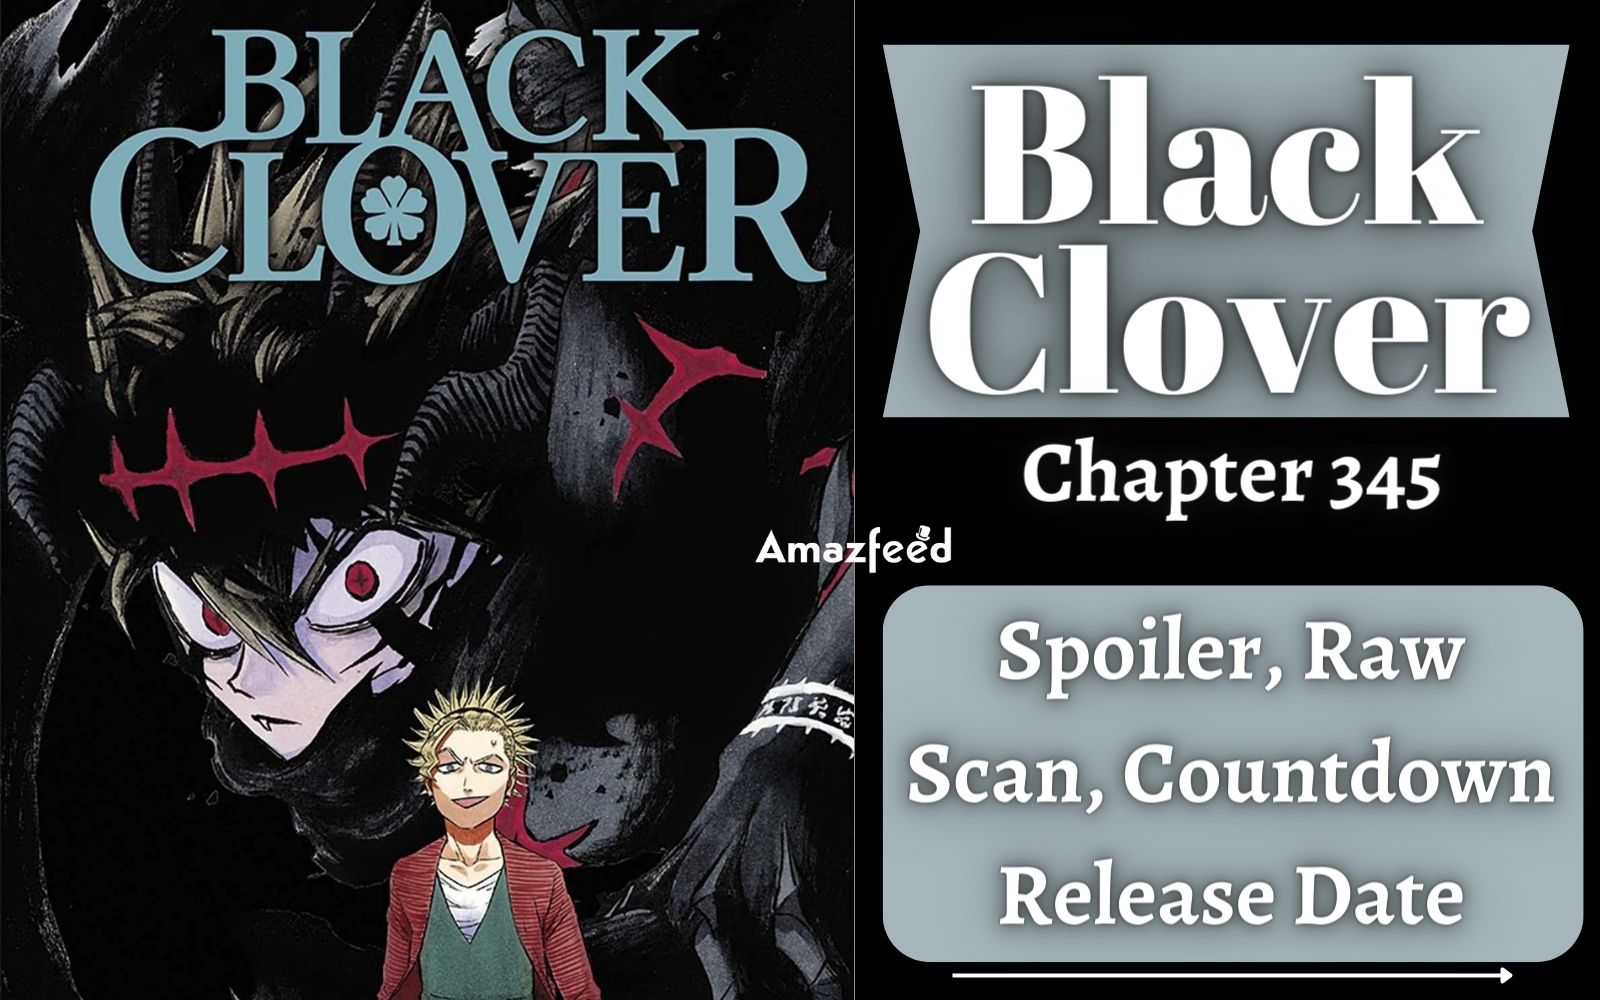 Black Clover Chapter 345 Spoiler, Plot, Raw Scan, Color Page, and Release Date